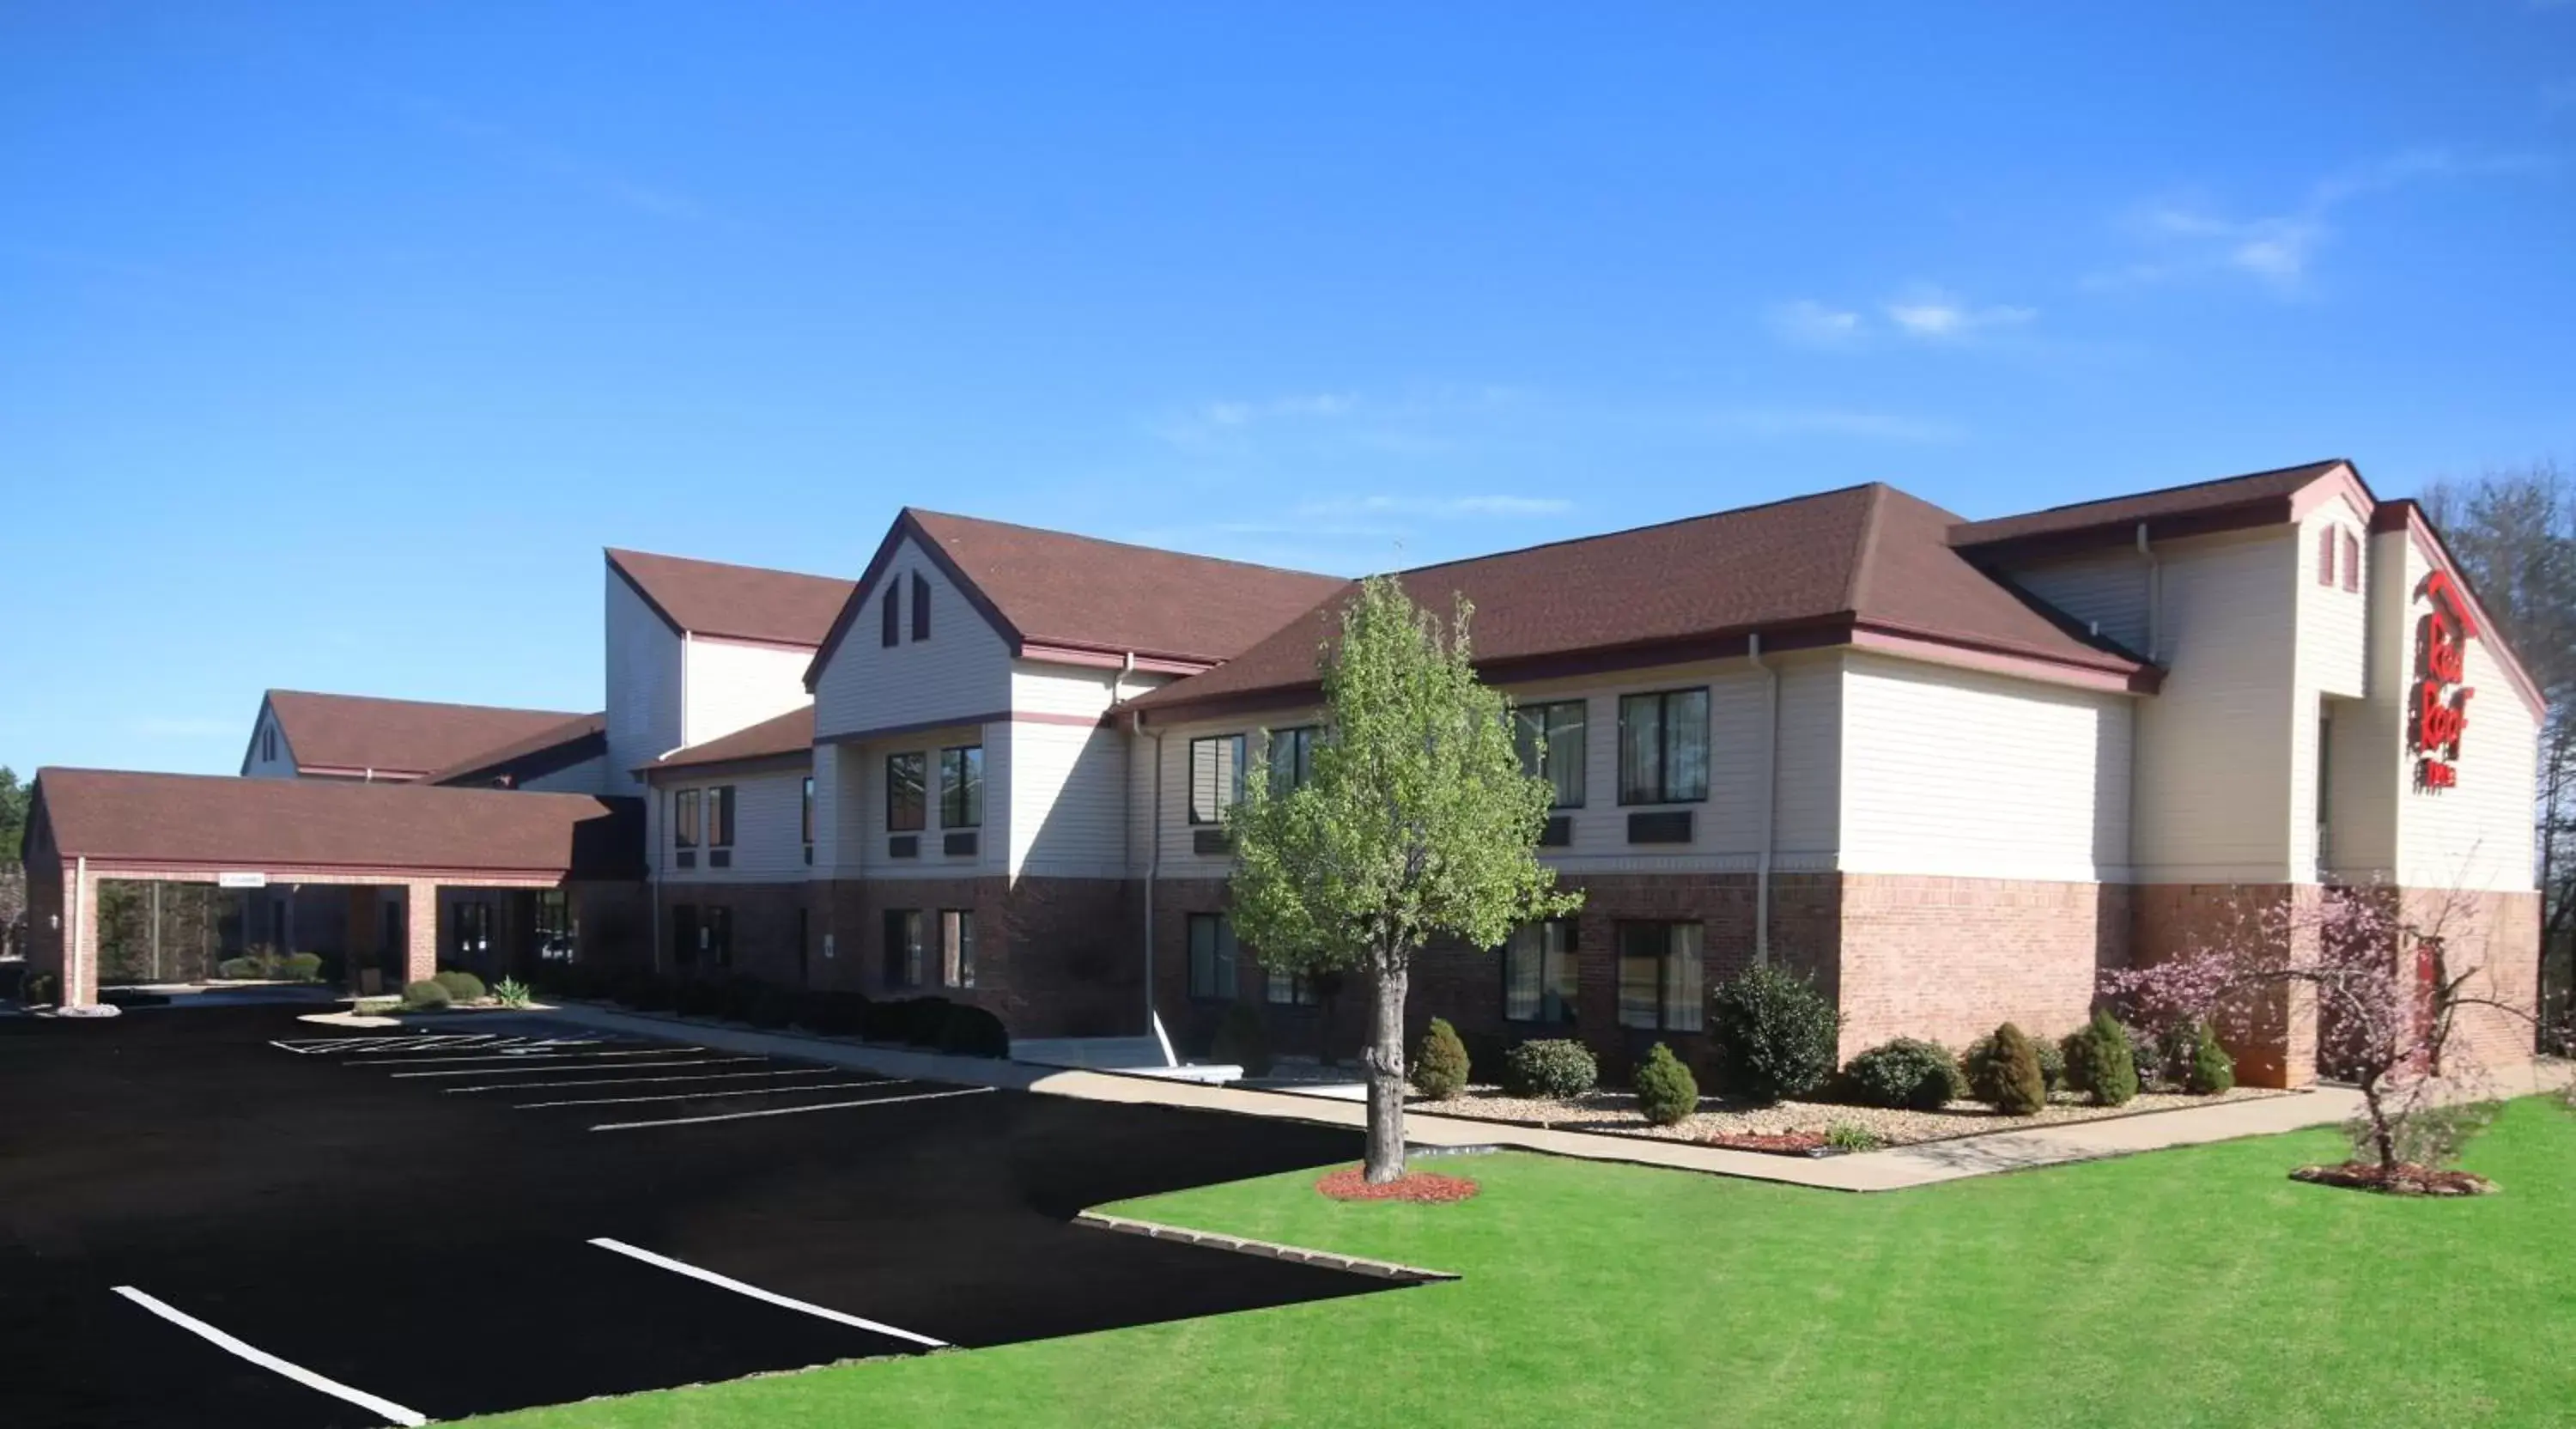 Property Building in Red Roof Inn Gaffney